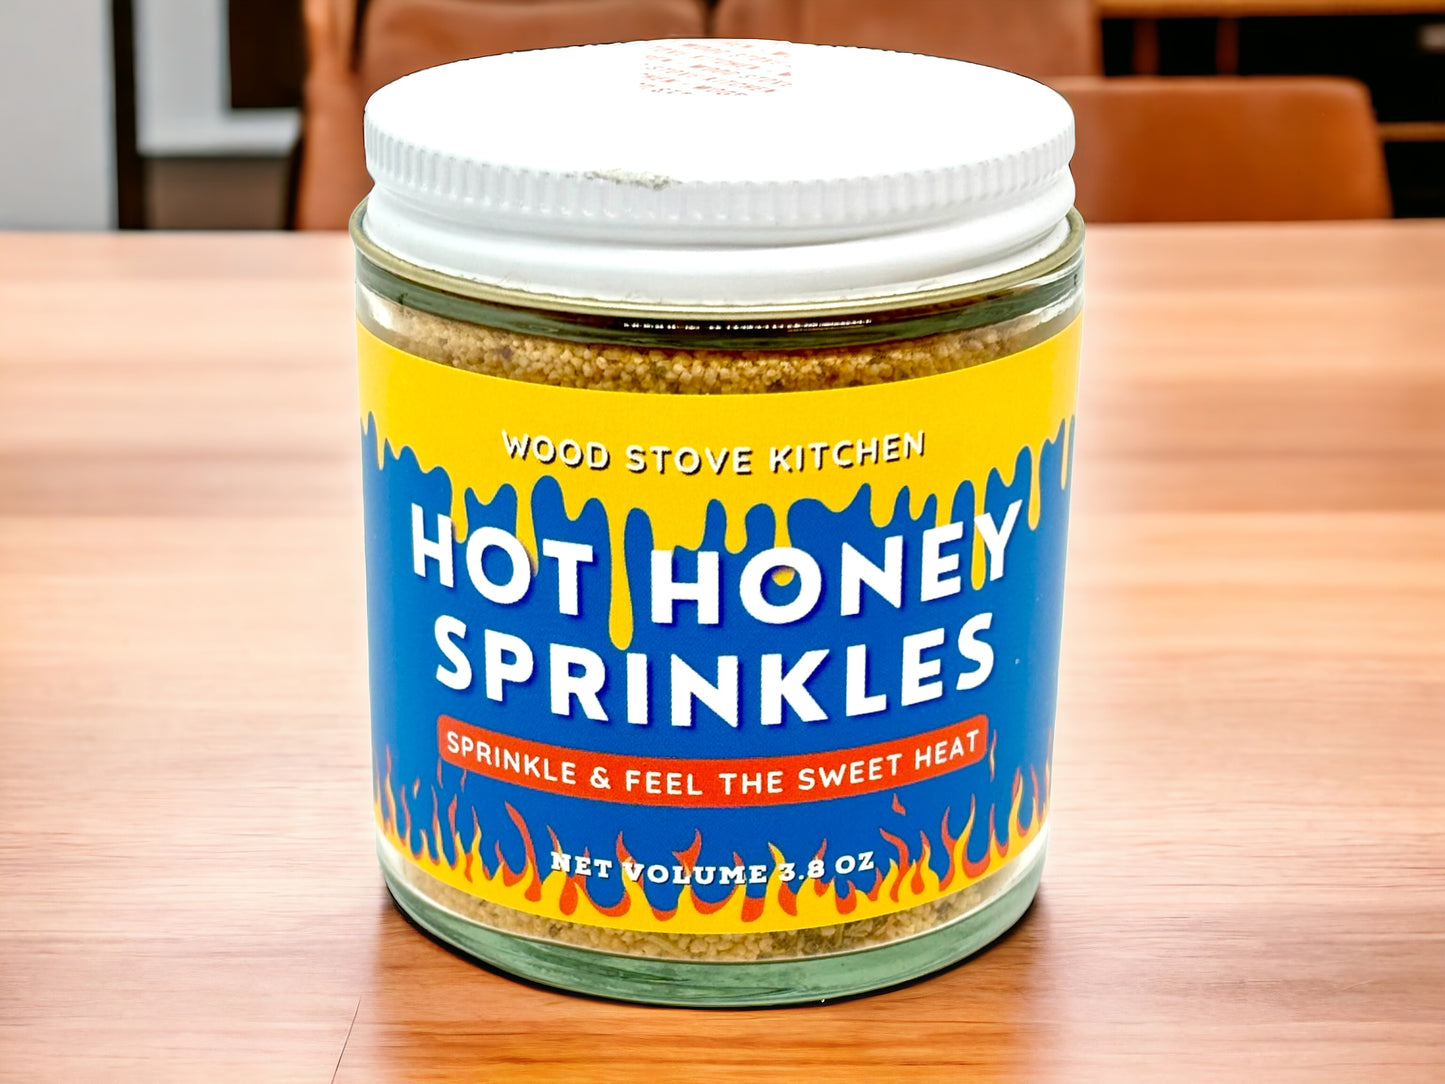 Hot Honey Sprinkles by Wood Stove Kitchen